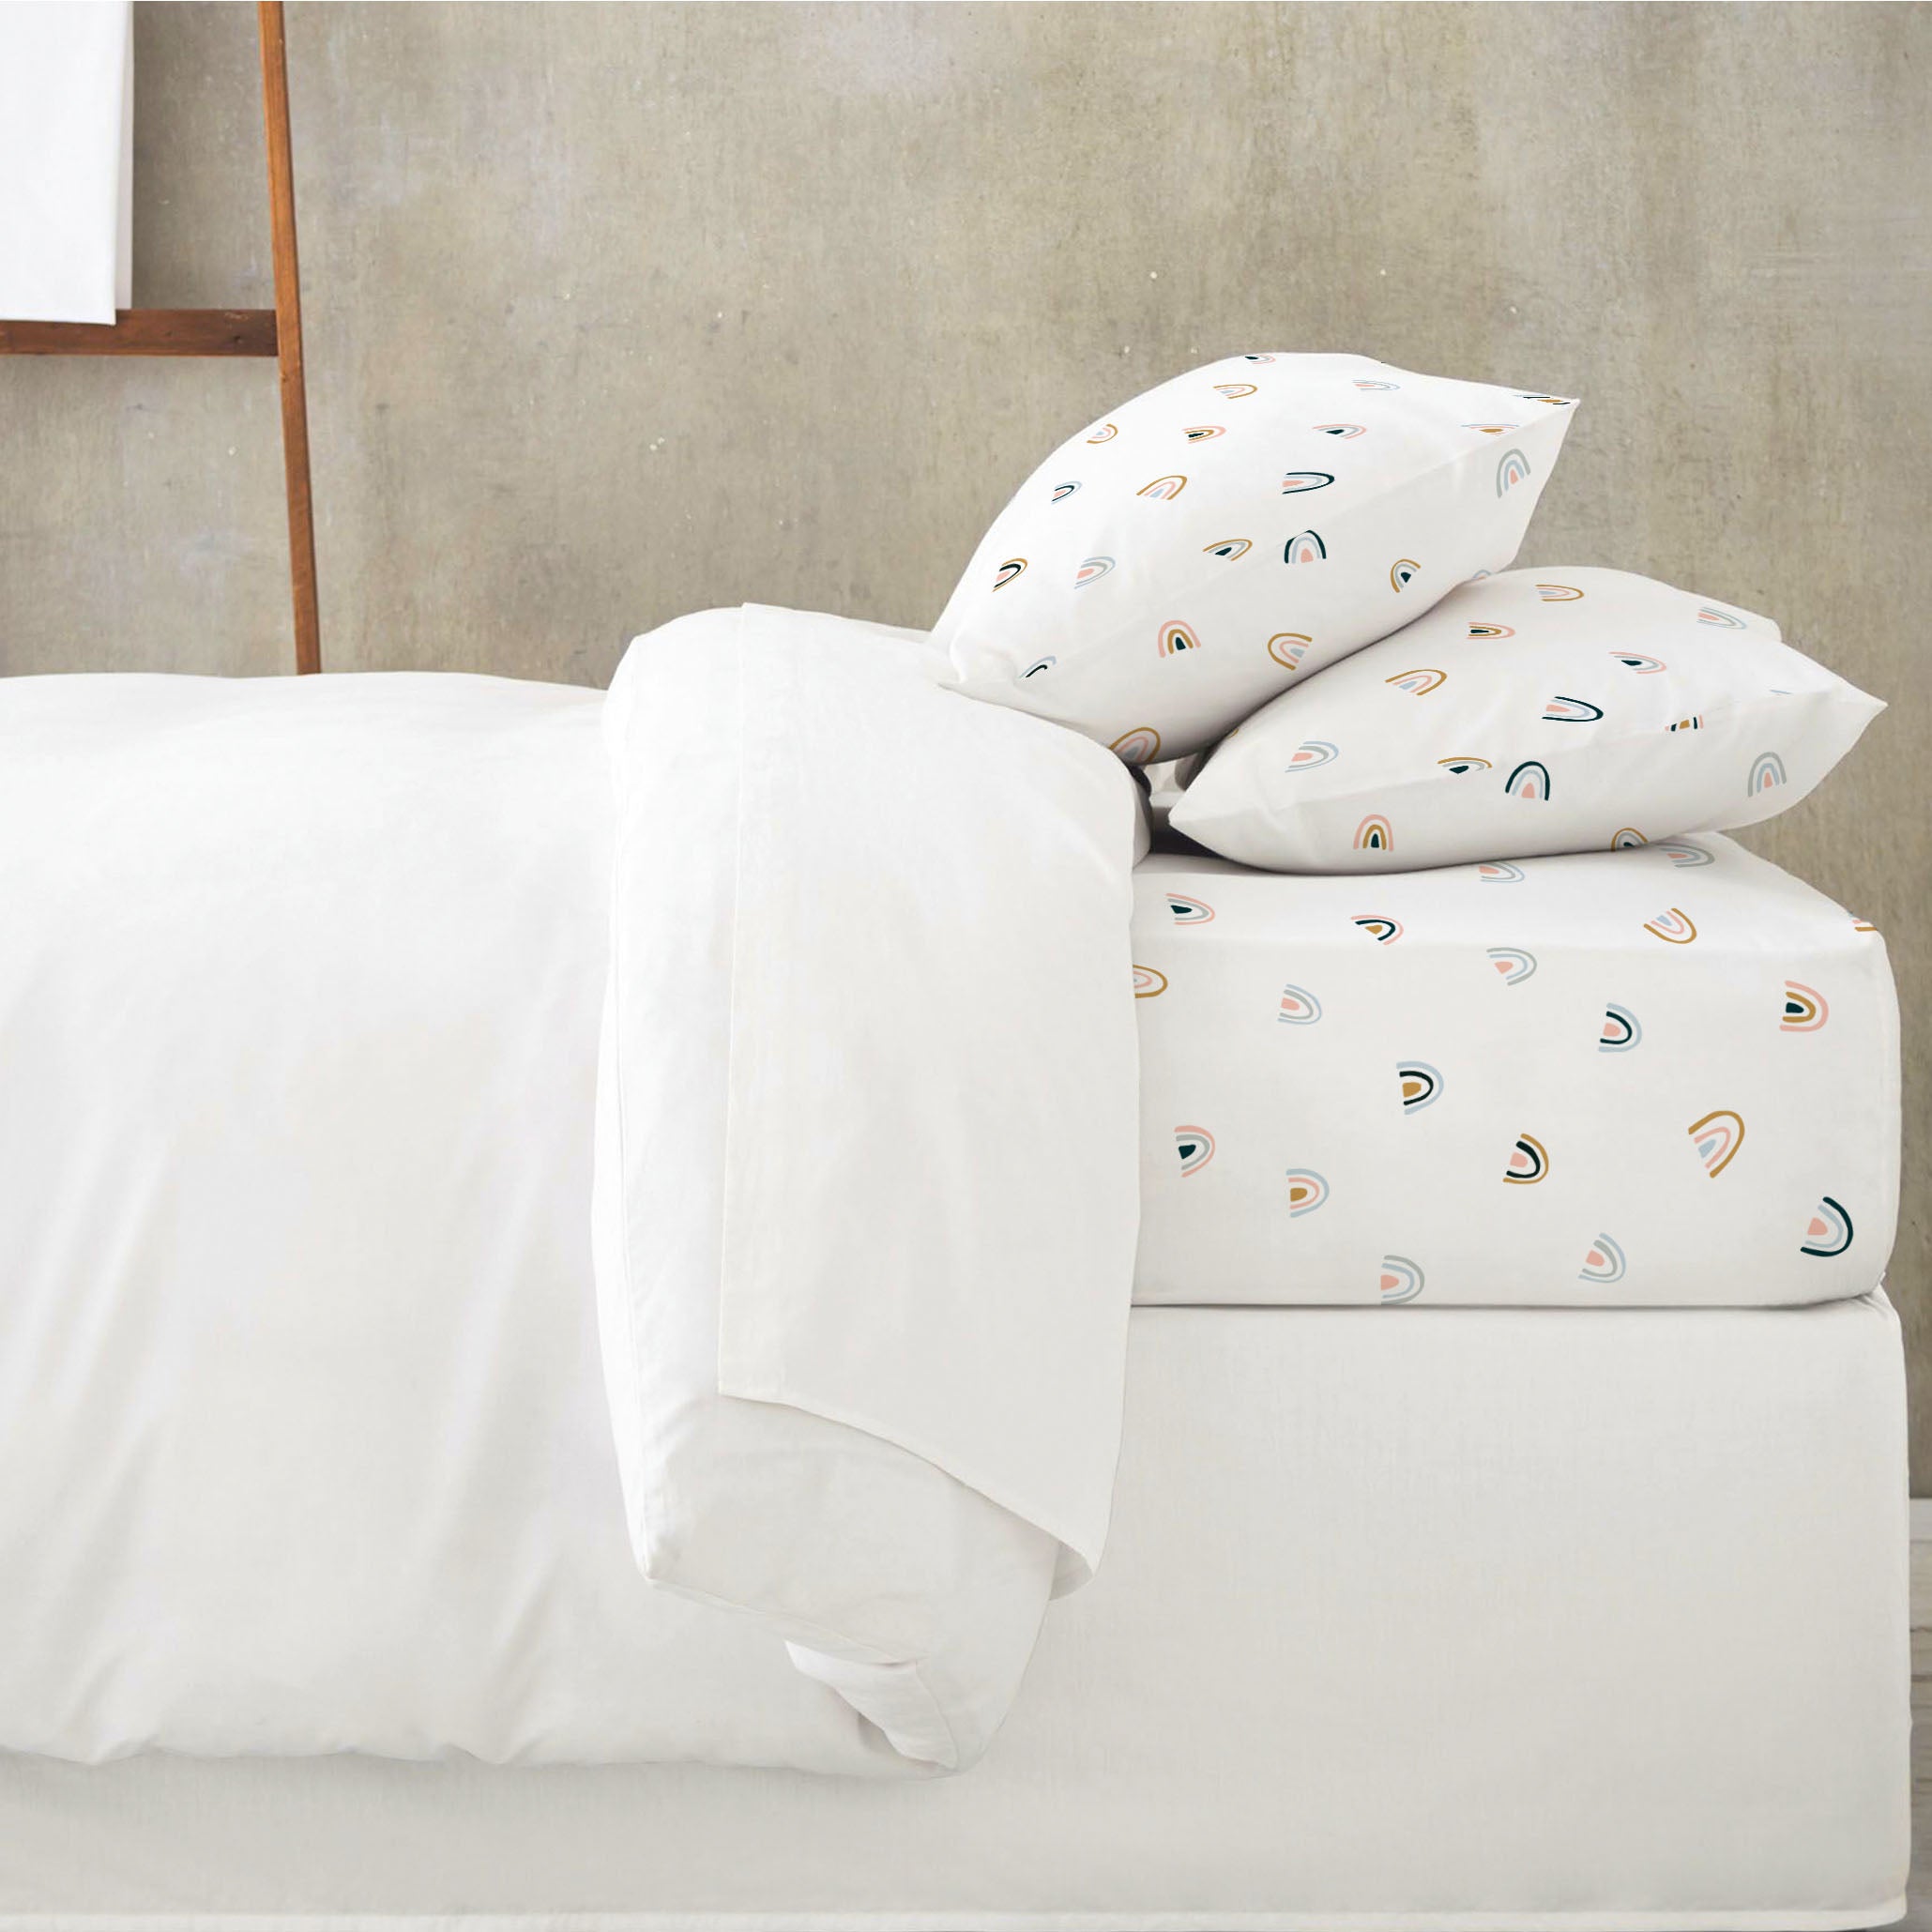 A neatly made bed with Makemake Organics' Organic Cotton Fitted Sheet Set - Rainbow, featuring a rainbows and moon design, positioned against a plain textured wall.